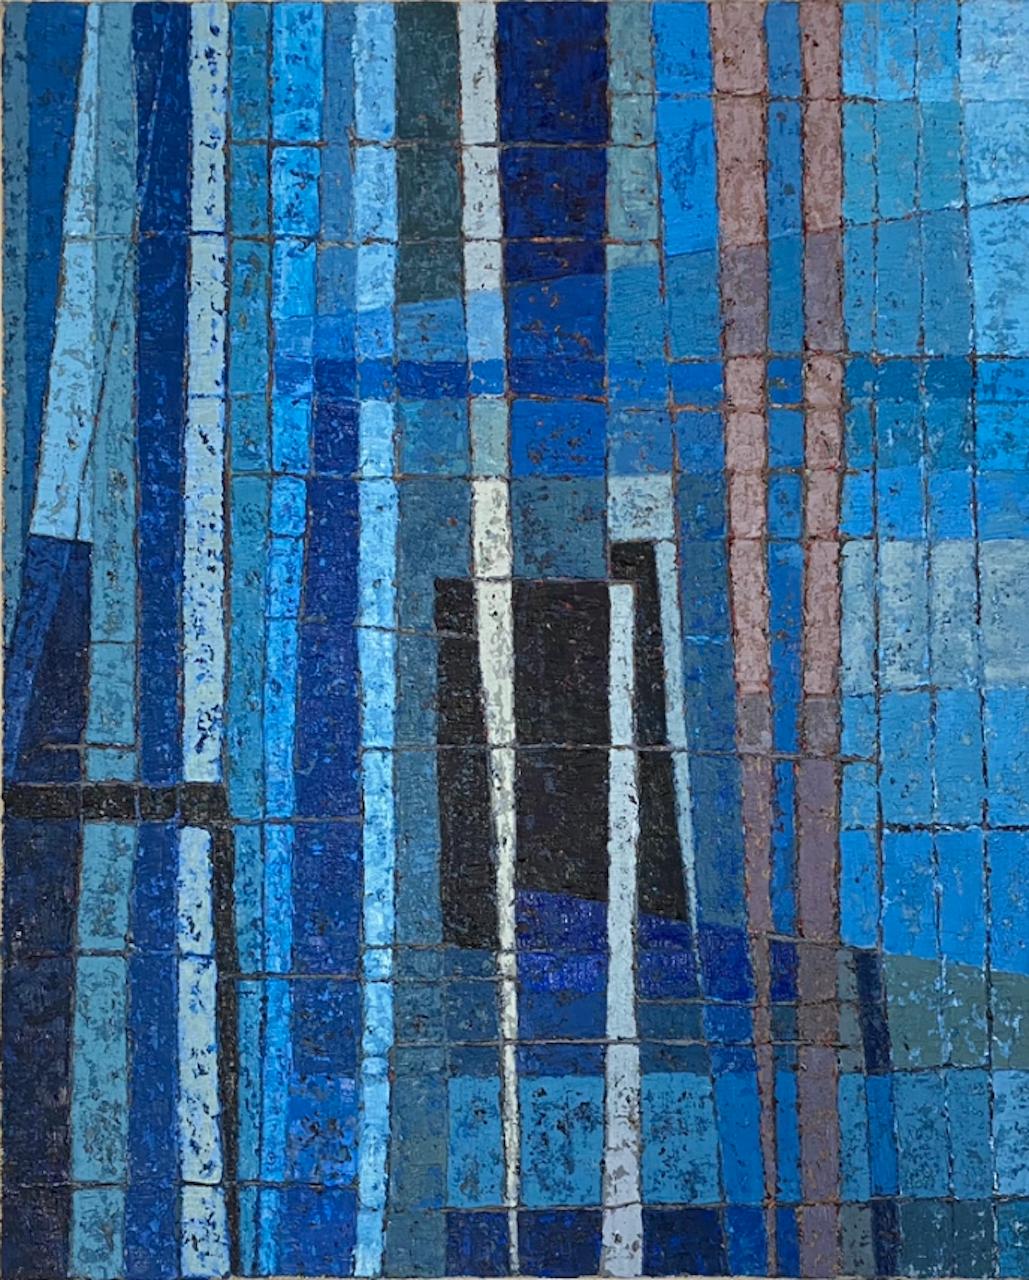 Miles Cole, Intersections, Blue Abstract Art, Original Painting, 